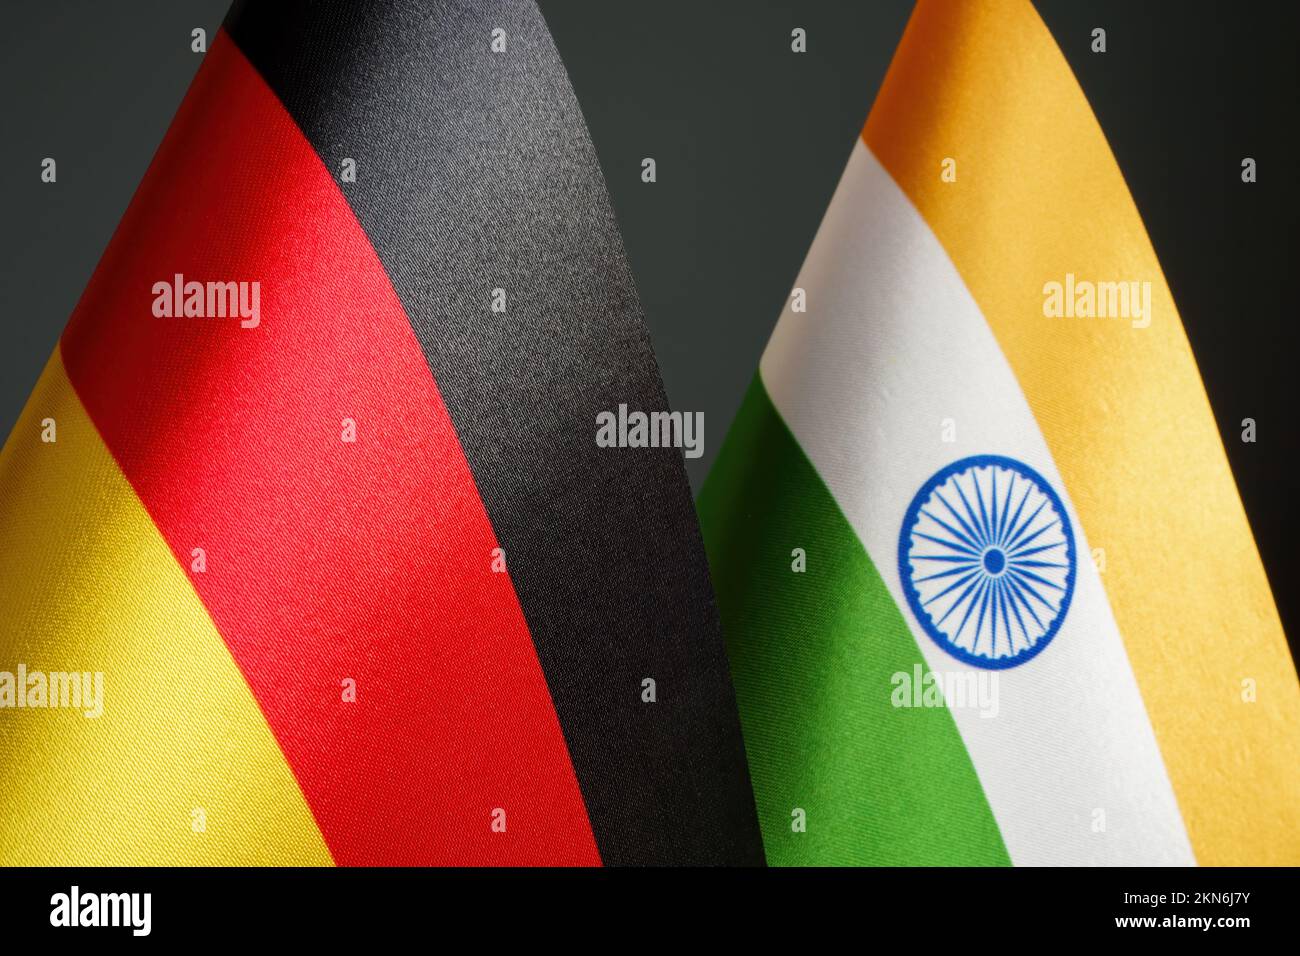 Flags of Germany and India as symbol of diplomatic relationship. Stock Photo